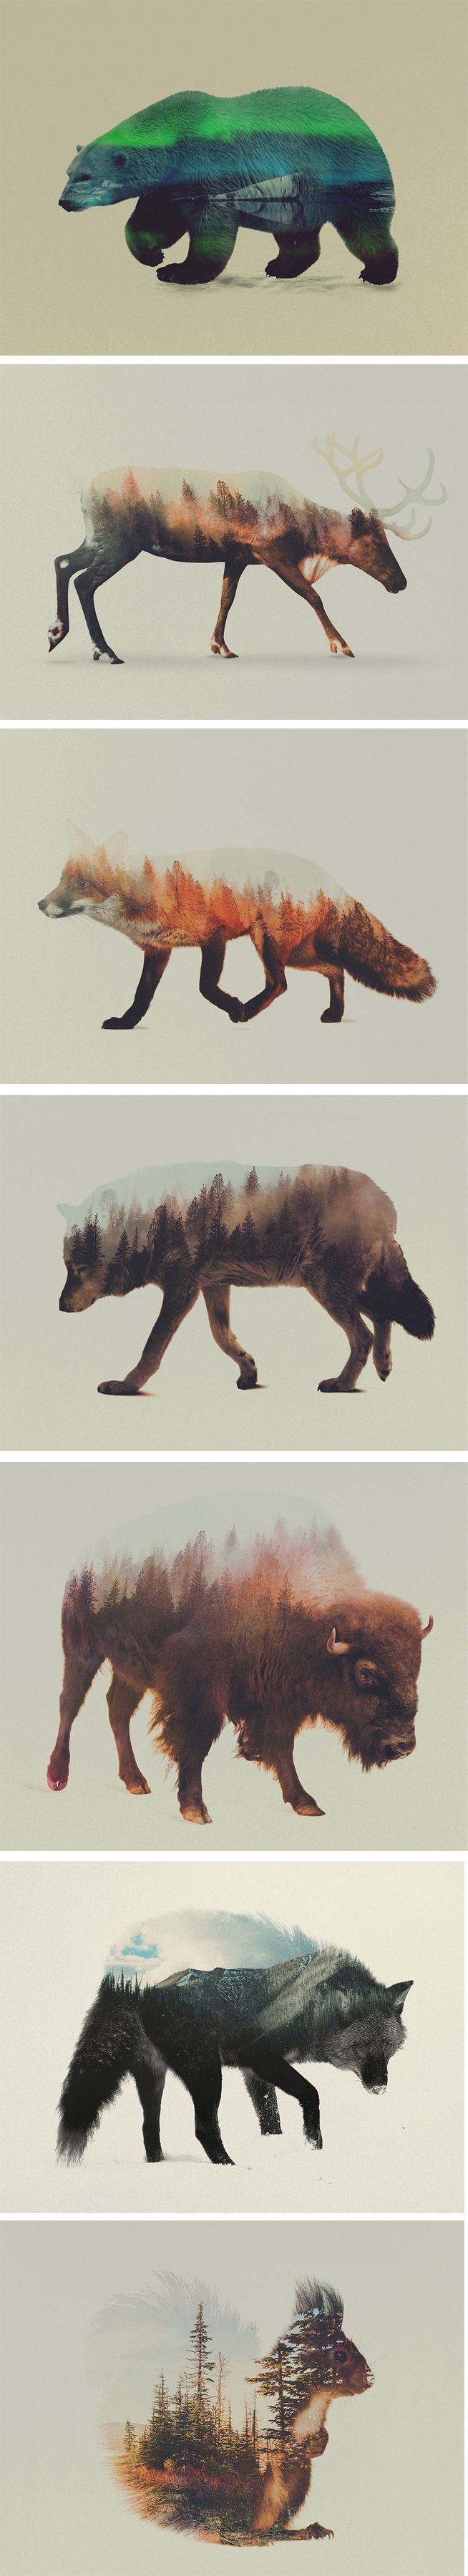 Norwegian visual artist Andreas Lie merges verdant landscapes and photographs of animals to creates subtle